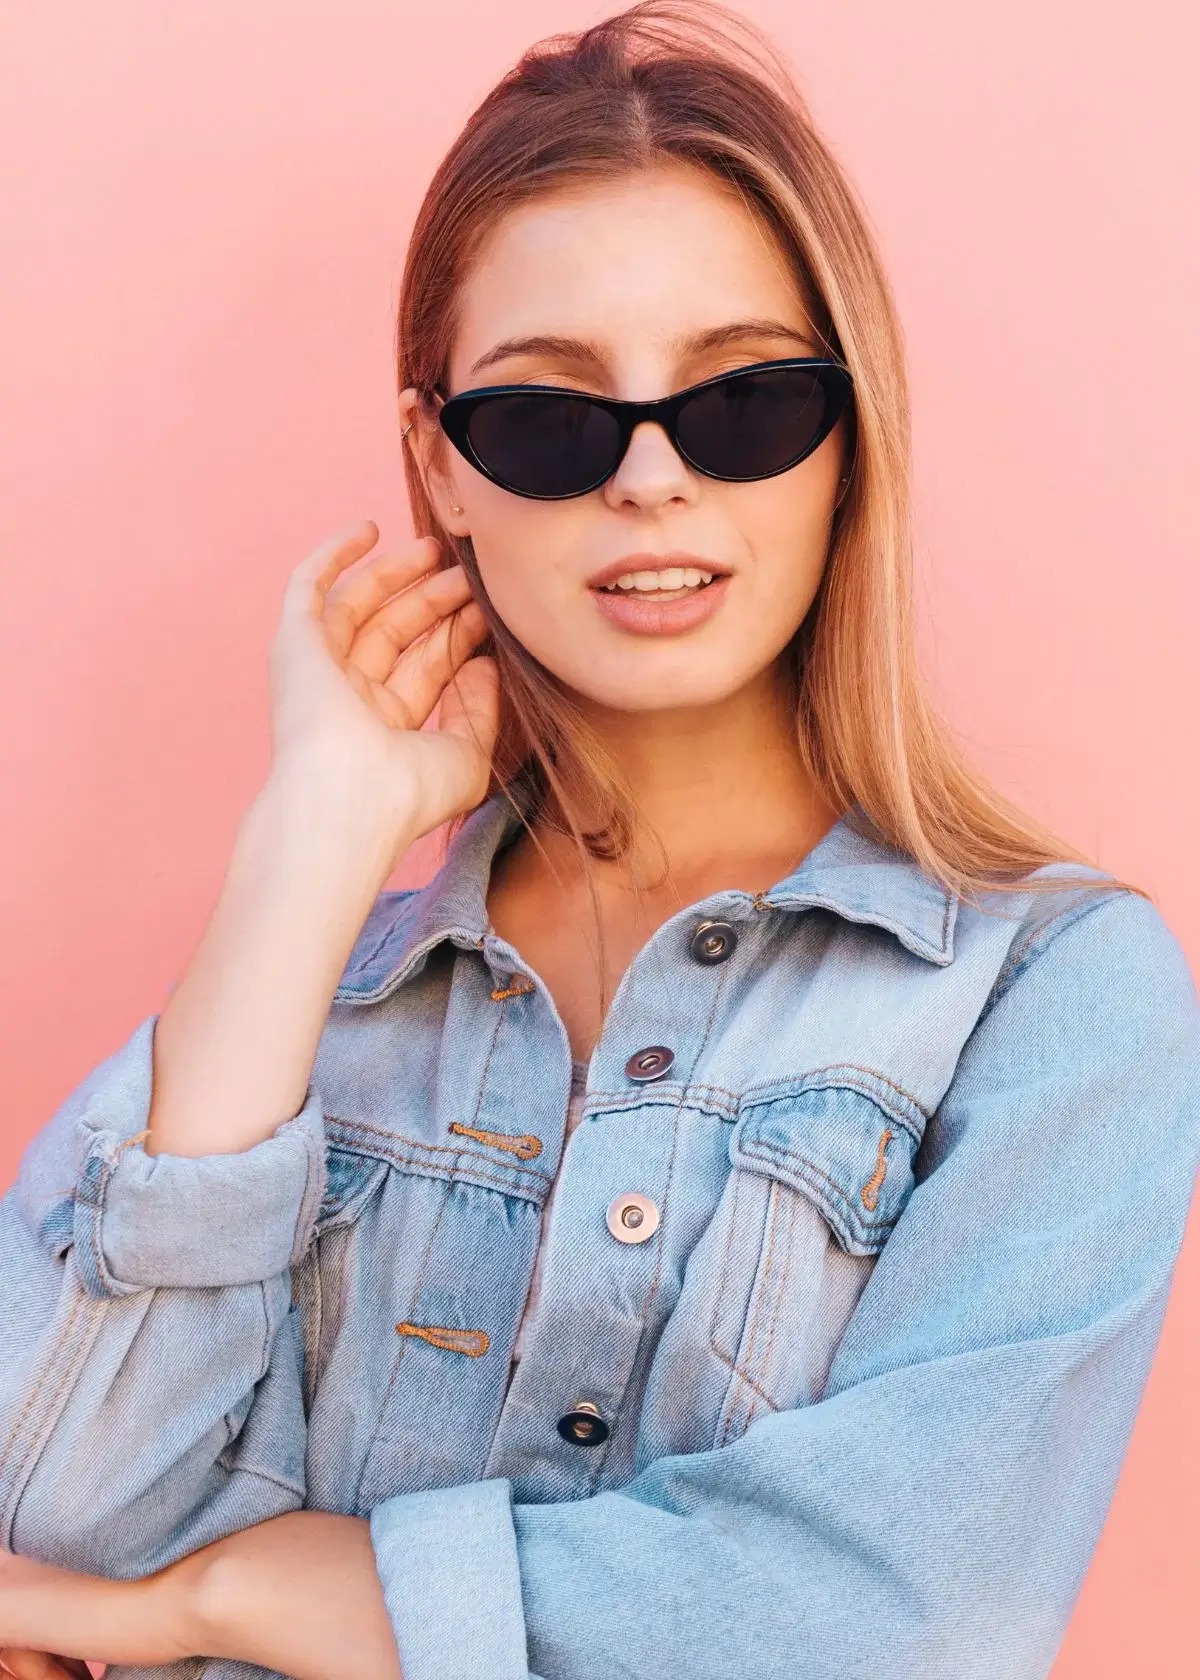 How to choose the right cat-eye sunglasses?